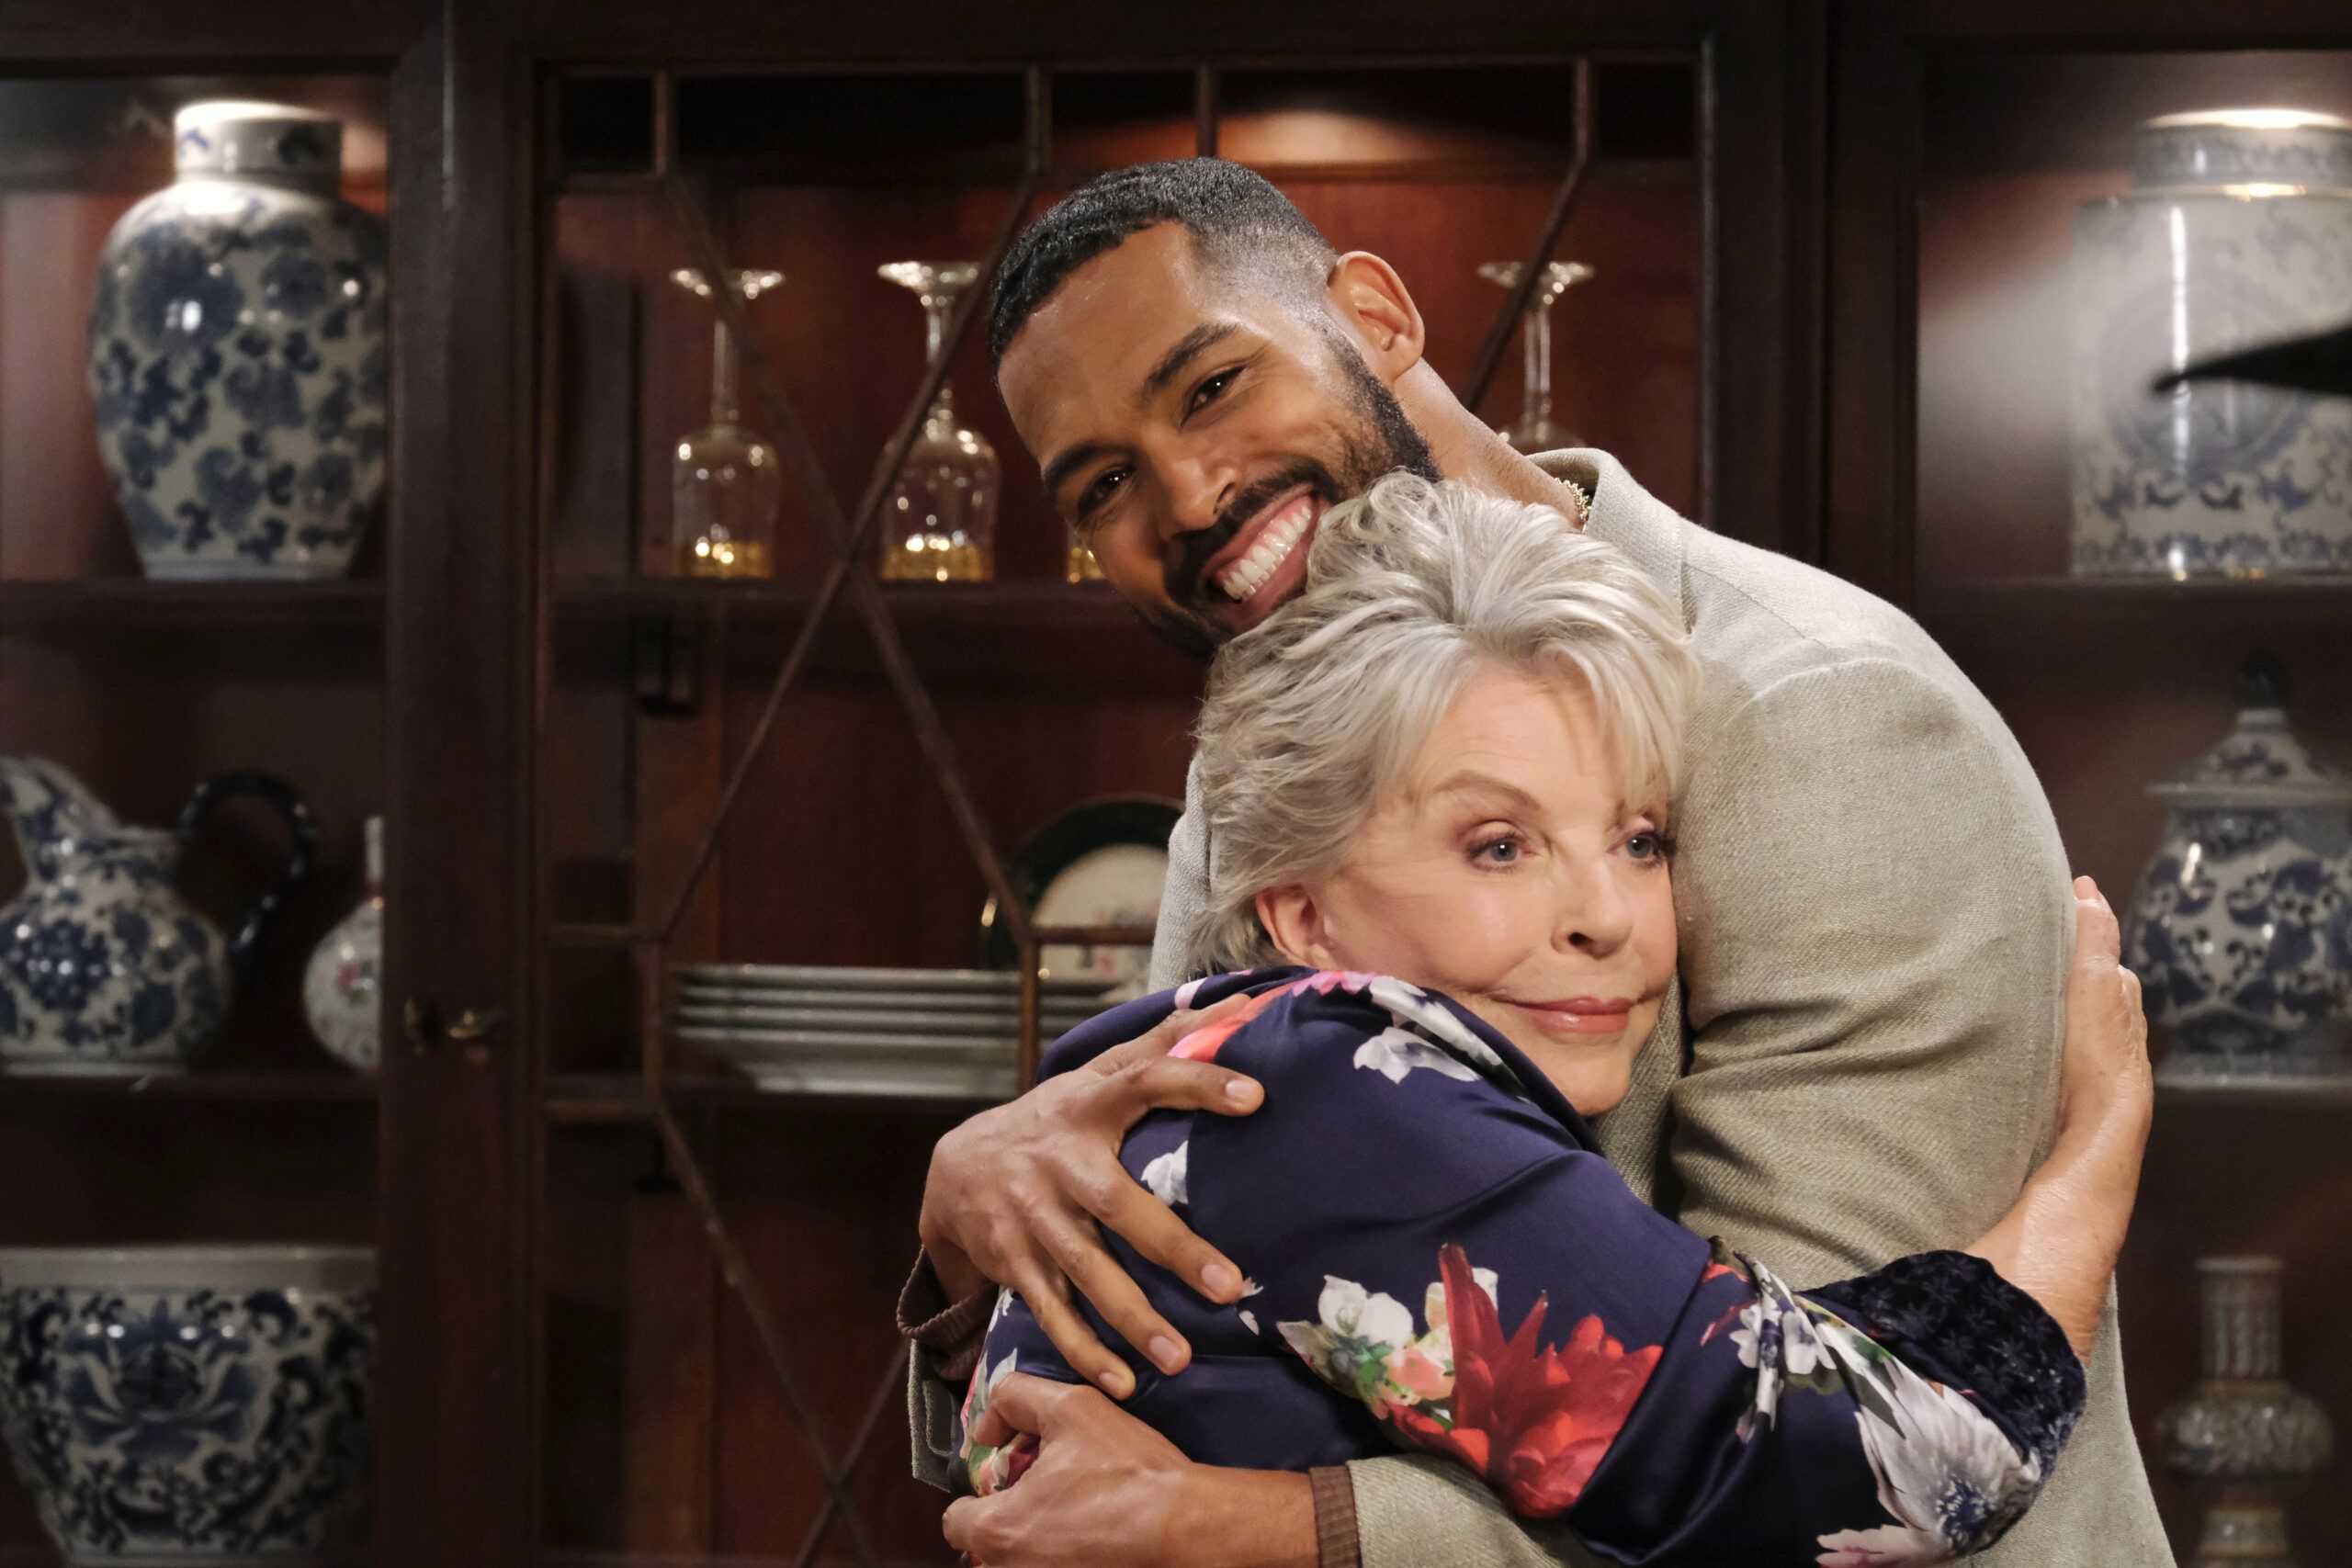 Susan Seaforth Hayes, Julie Williams, Lamon Archey, Eli Grant, Days of our Lives, DAYS, DOOL, #DAYS, #DOOL, #DaysofourLives